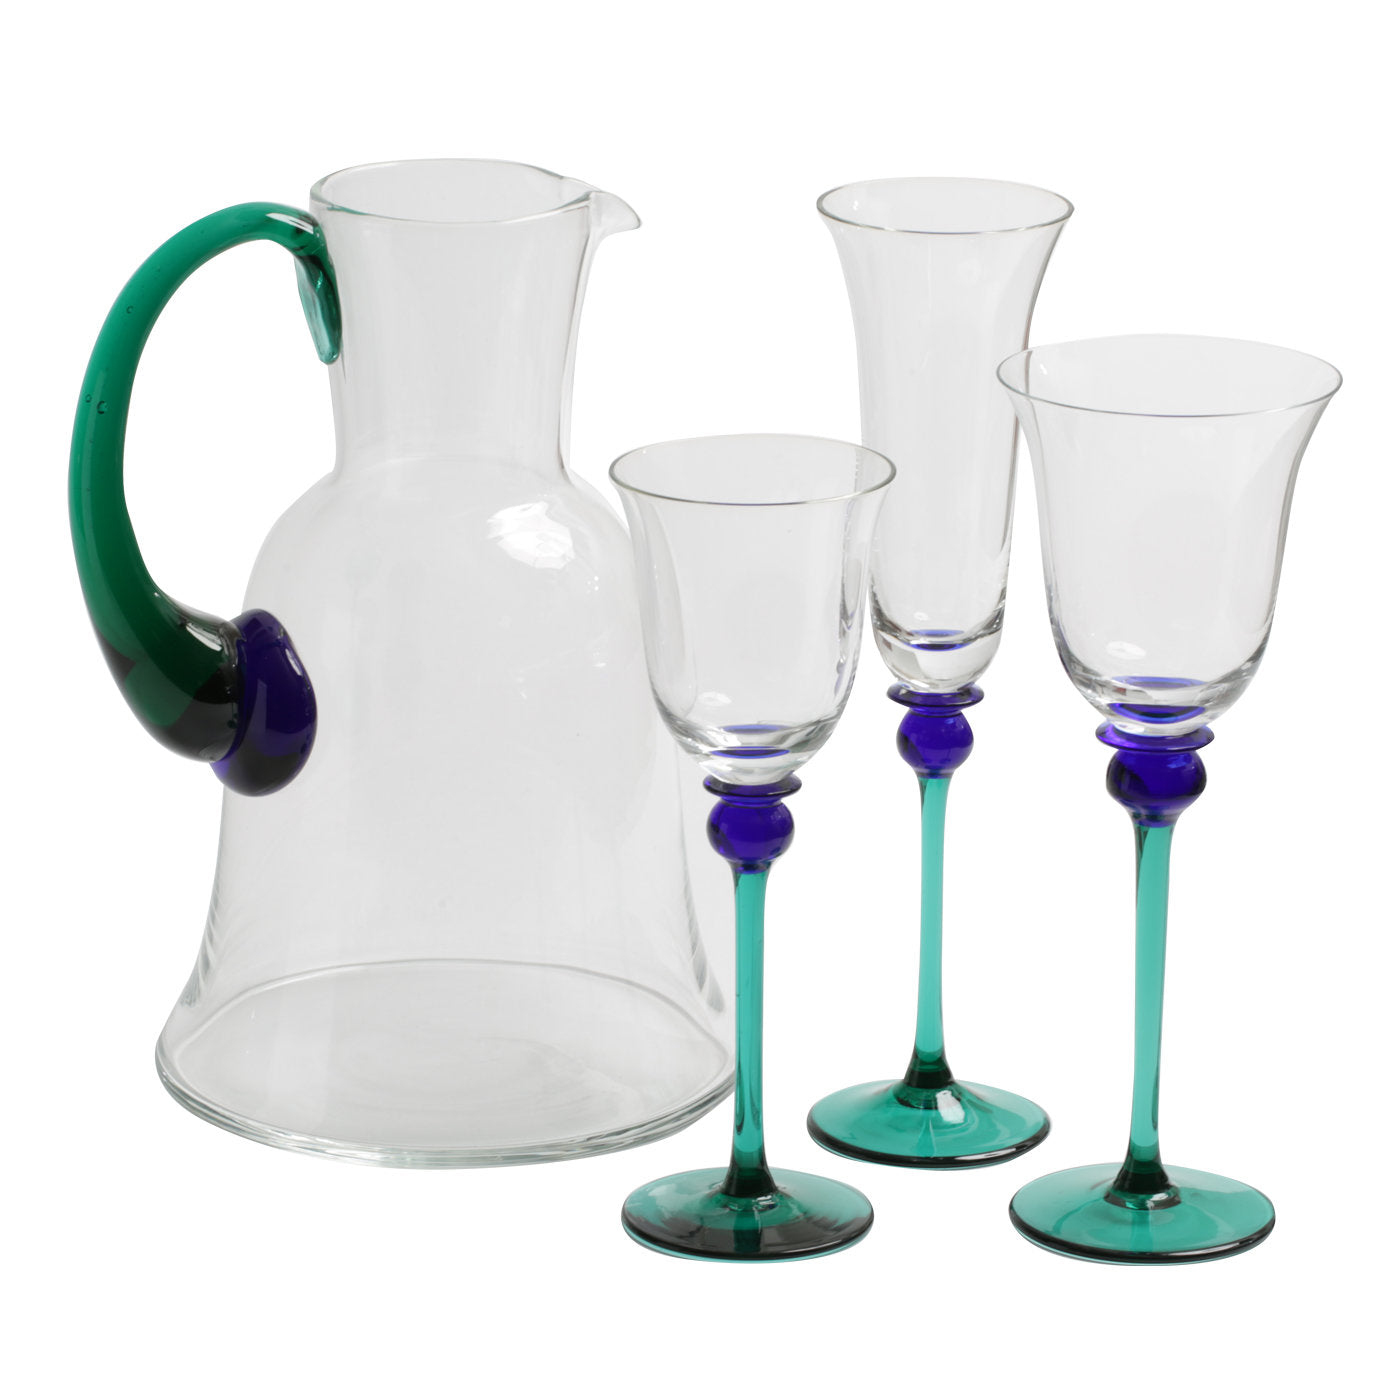 Mazzorbo Set of 3 Glasses for Six and Pitcher - Main view